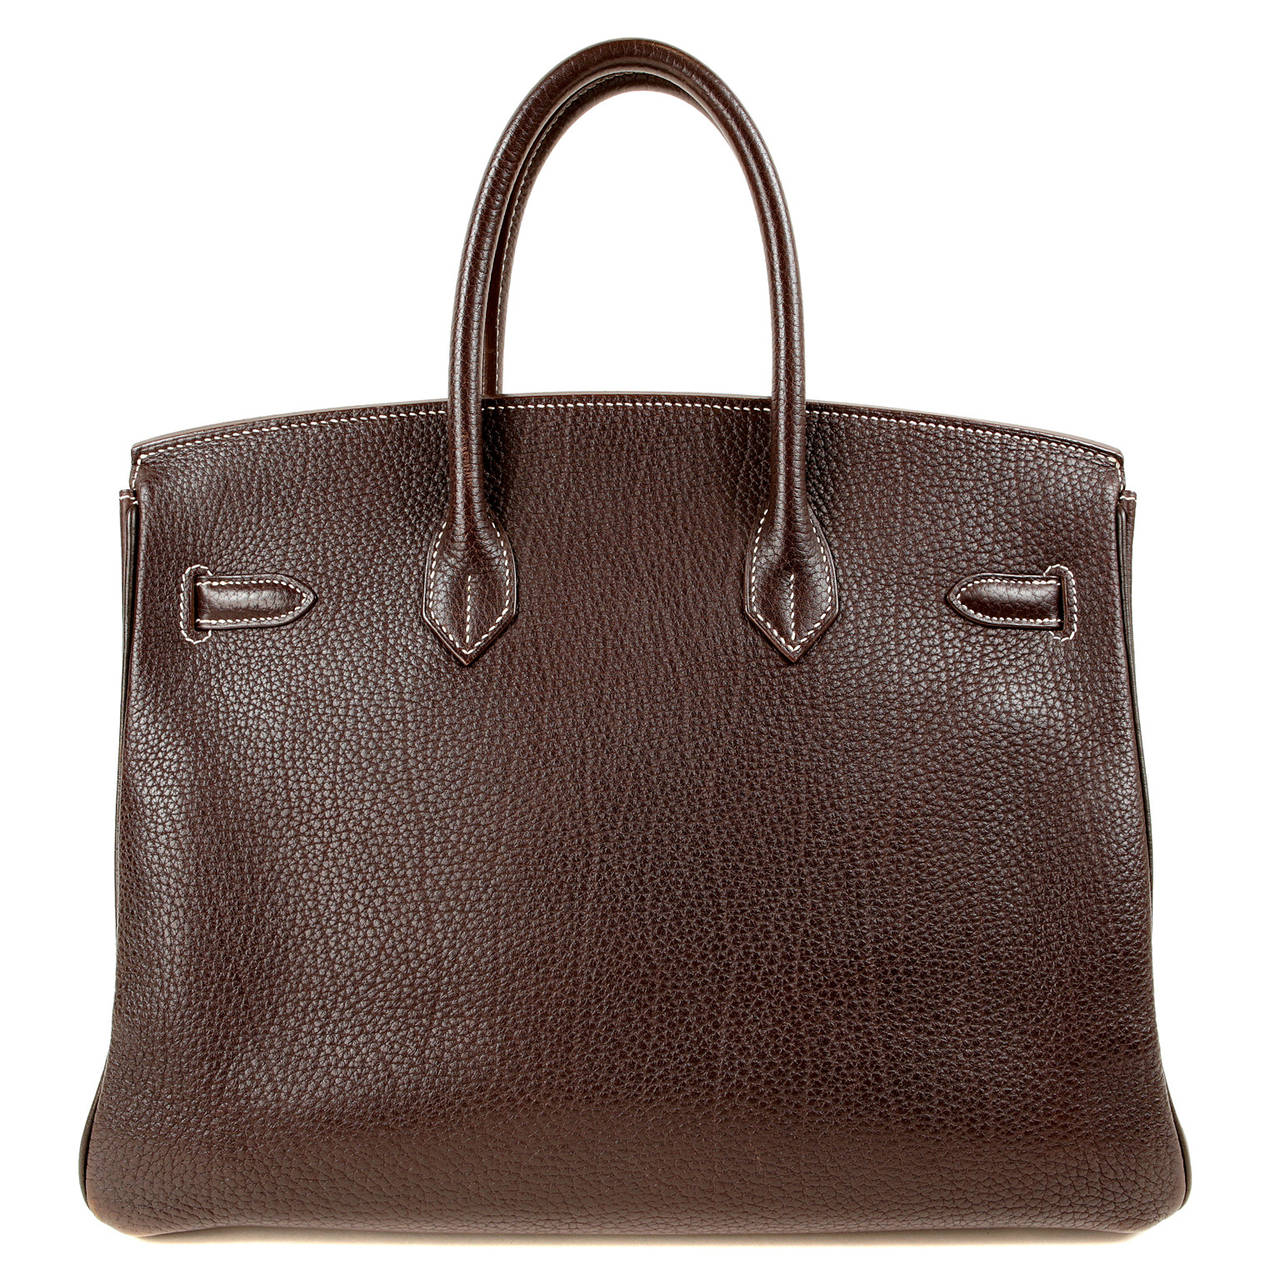 Hermès Ebene 35 cm Fjord Birkin is beautifully pristine.   In rich deep brown Ebene with Palladium hardware, this is a stunning Birkin.  
Hermès bags are considered the ultimate luxury item the world over.  Hand stitched by skilled craftsmen,